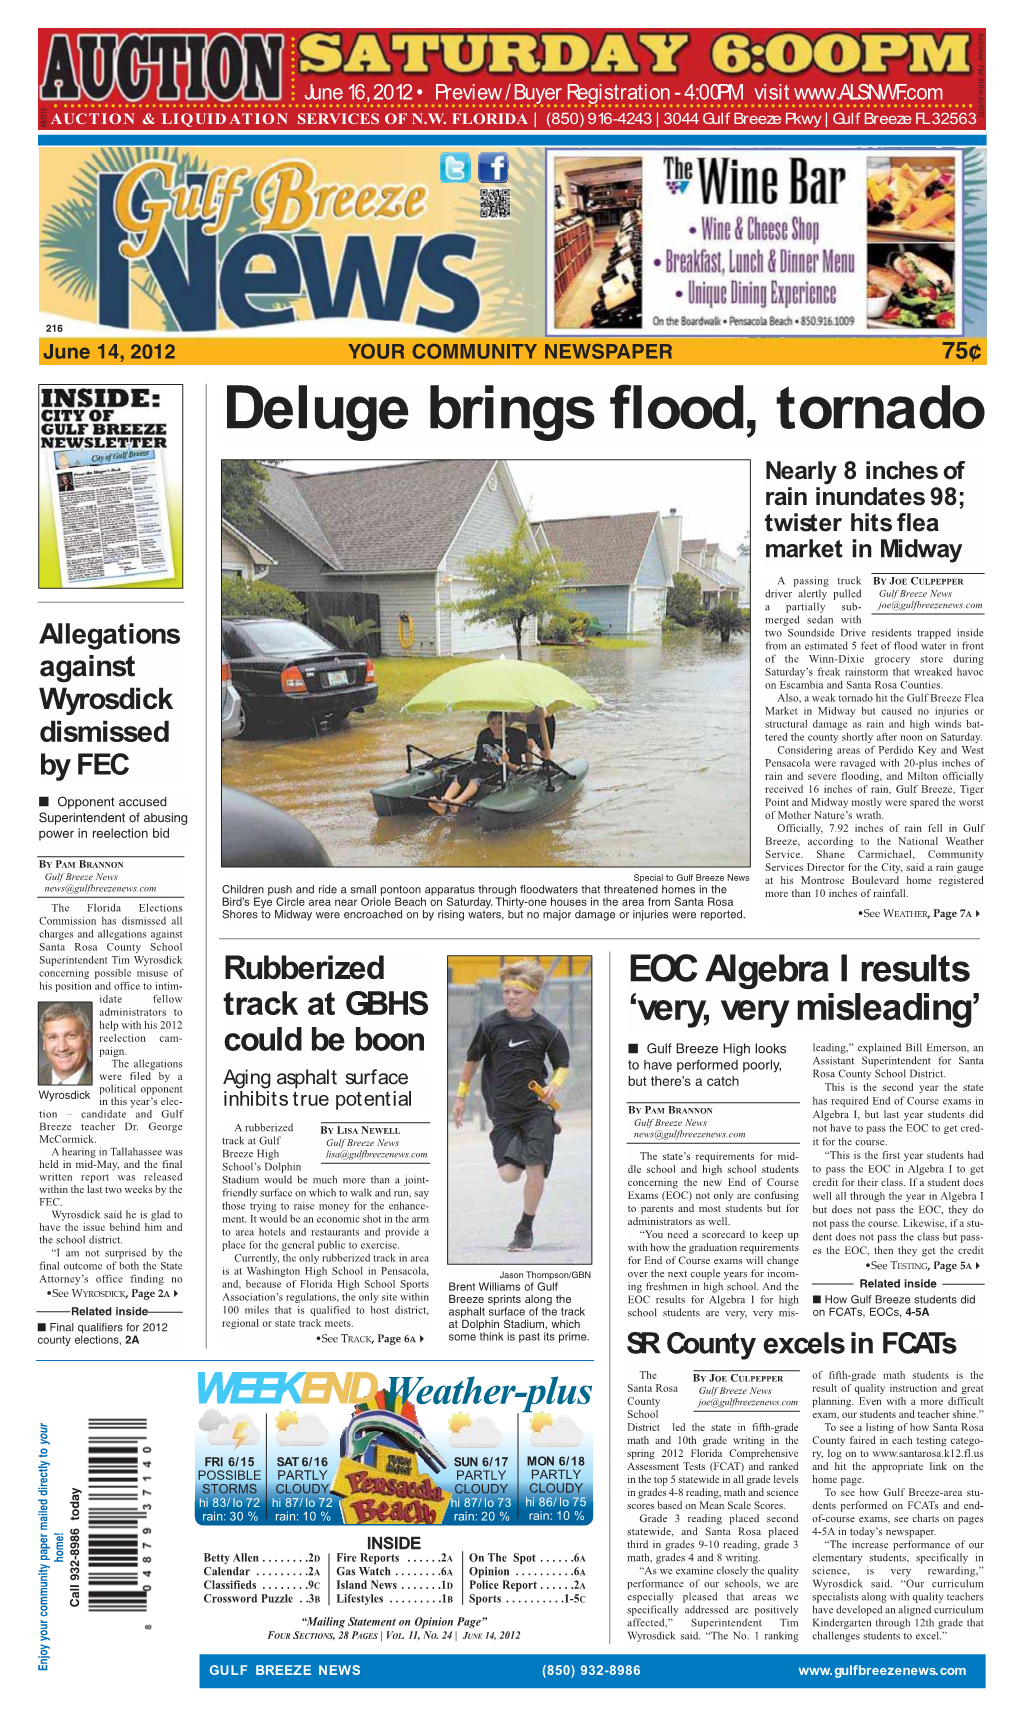 Deluge Brings Flood, Tornado Nearly 8 Inches of Rain Inundates 98; Twister Hits Flea Market in Midway